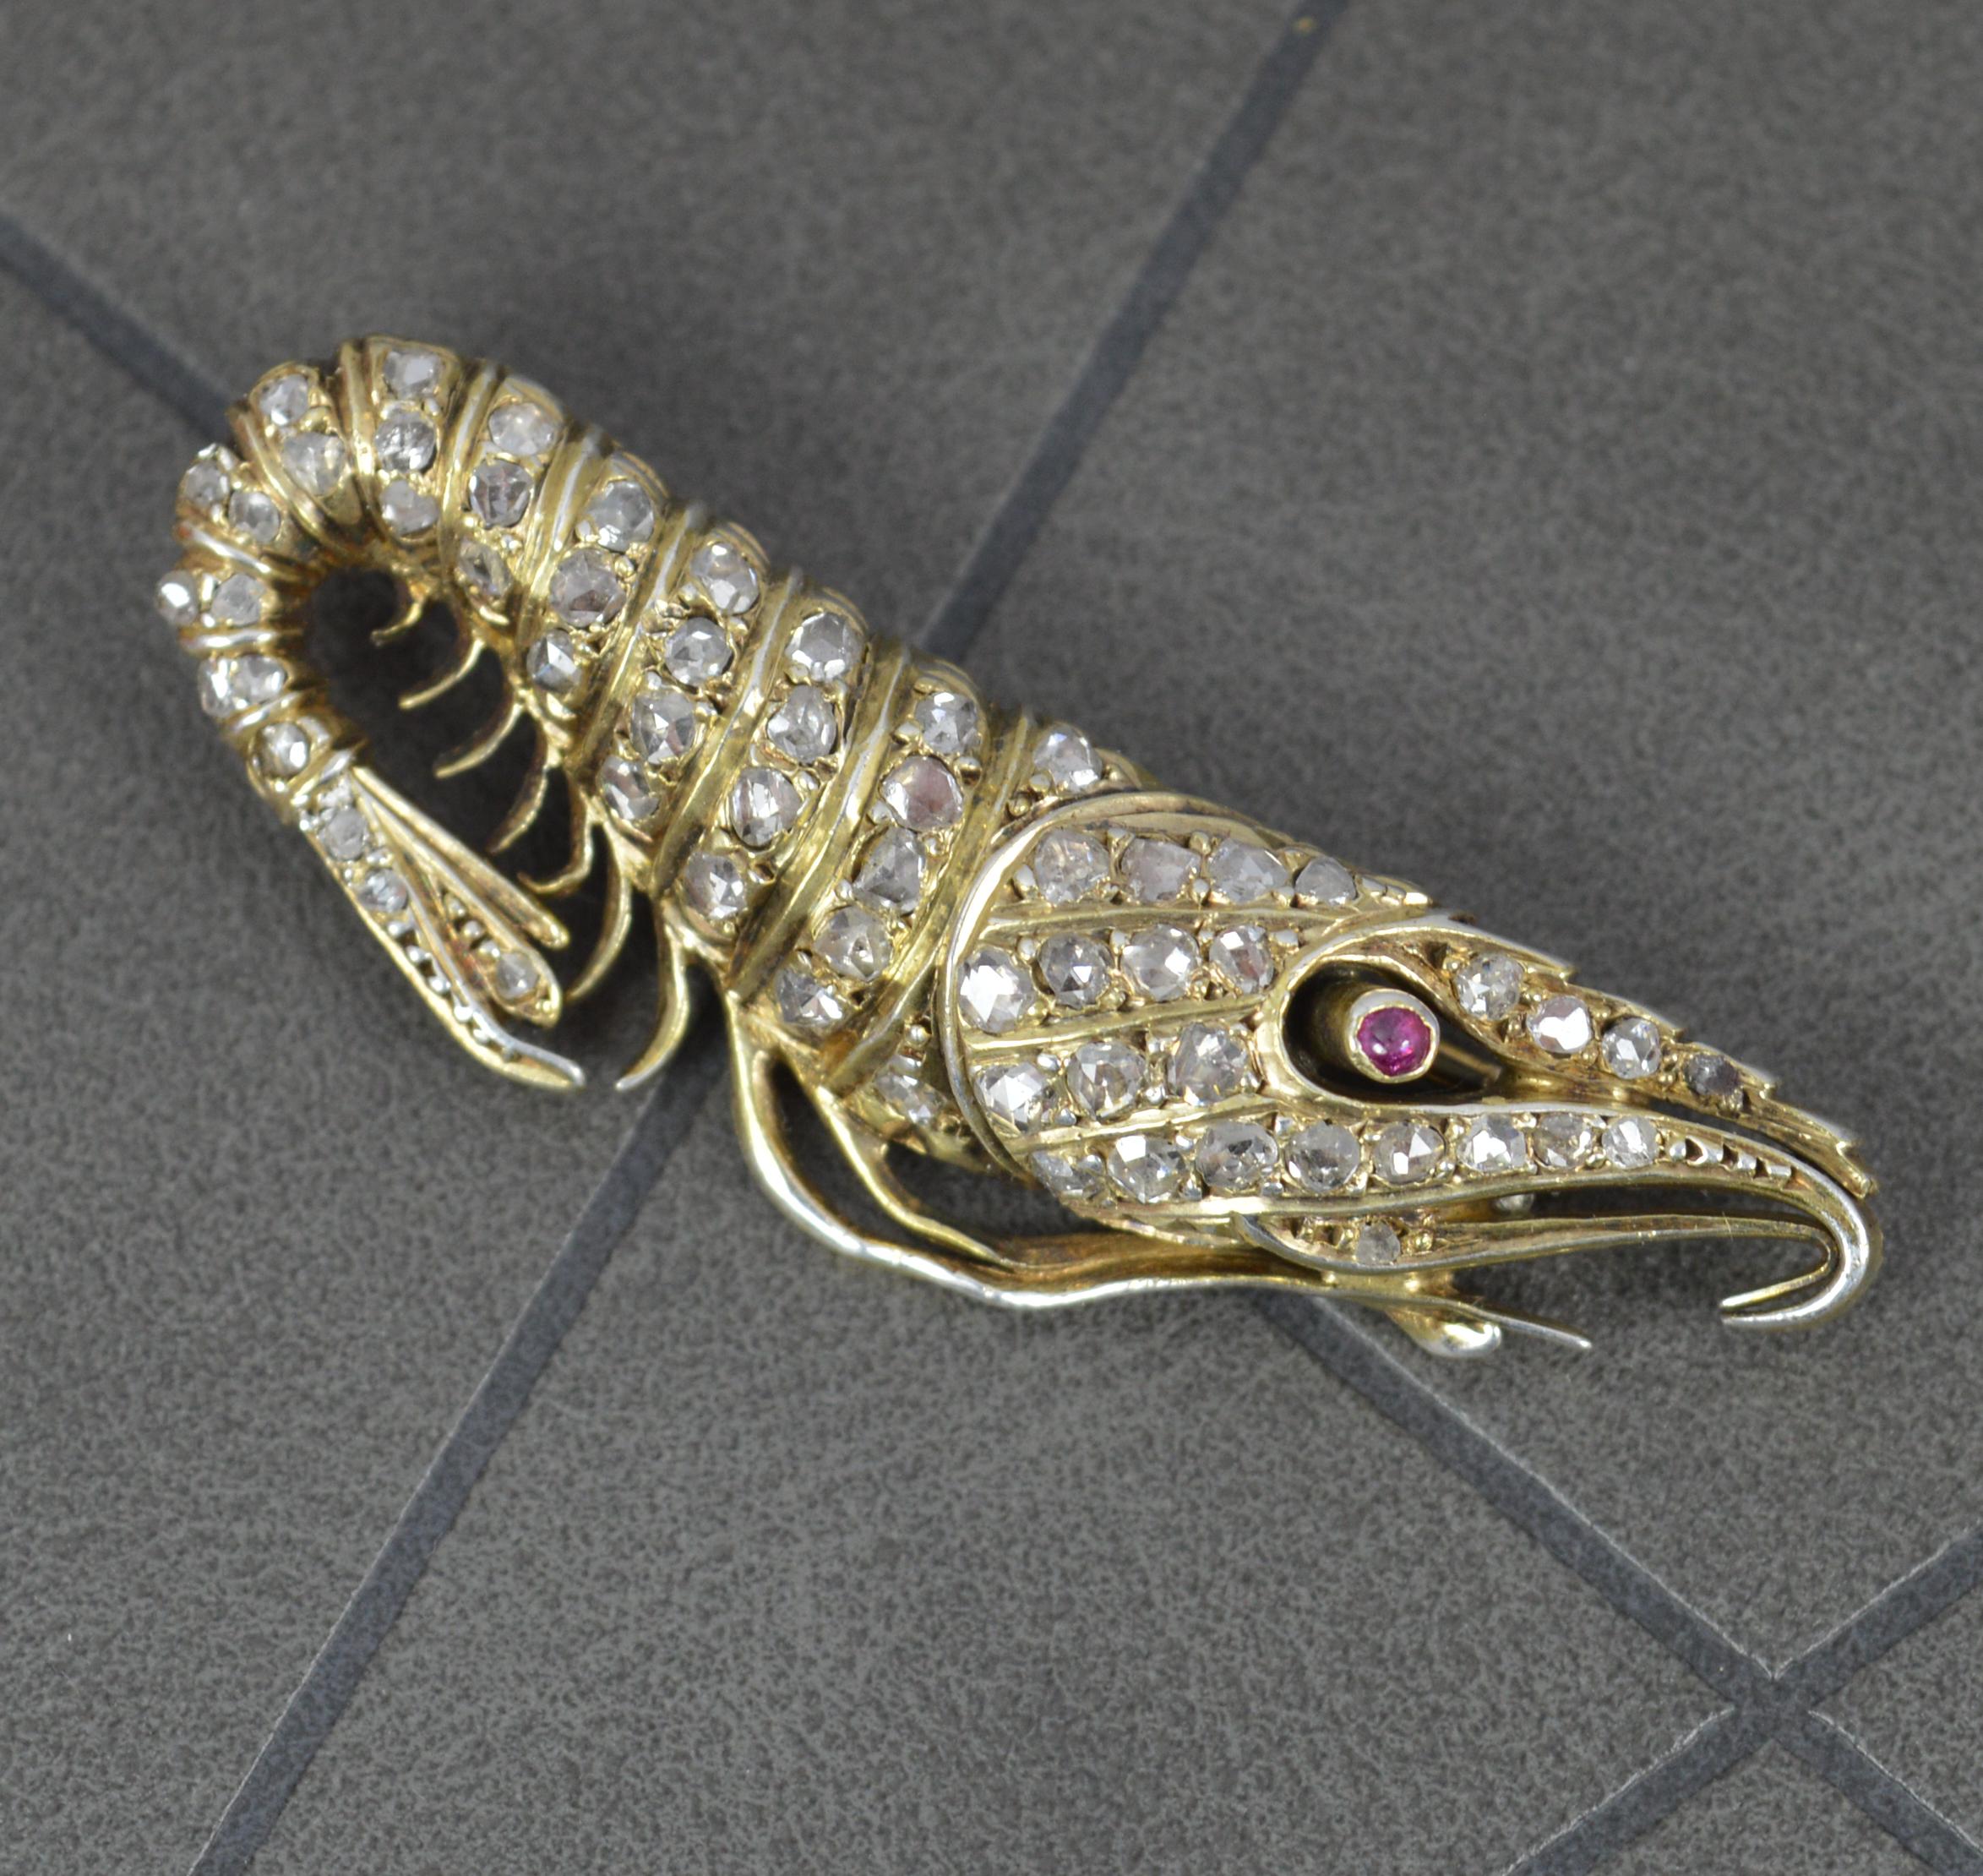 A totally captivating and unique Victorian period brooch, circa 1880.
Solid 15 carat gold example. A solid and well made example, a great gauge of gold.
Realistically designed as a shrimp. Never seen anything like it.
Set with a single ruby cabochon